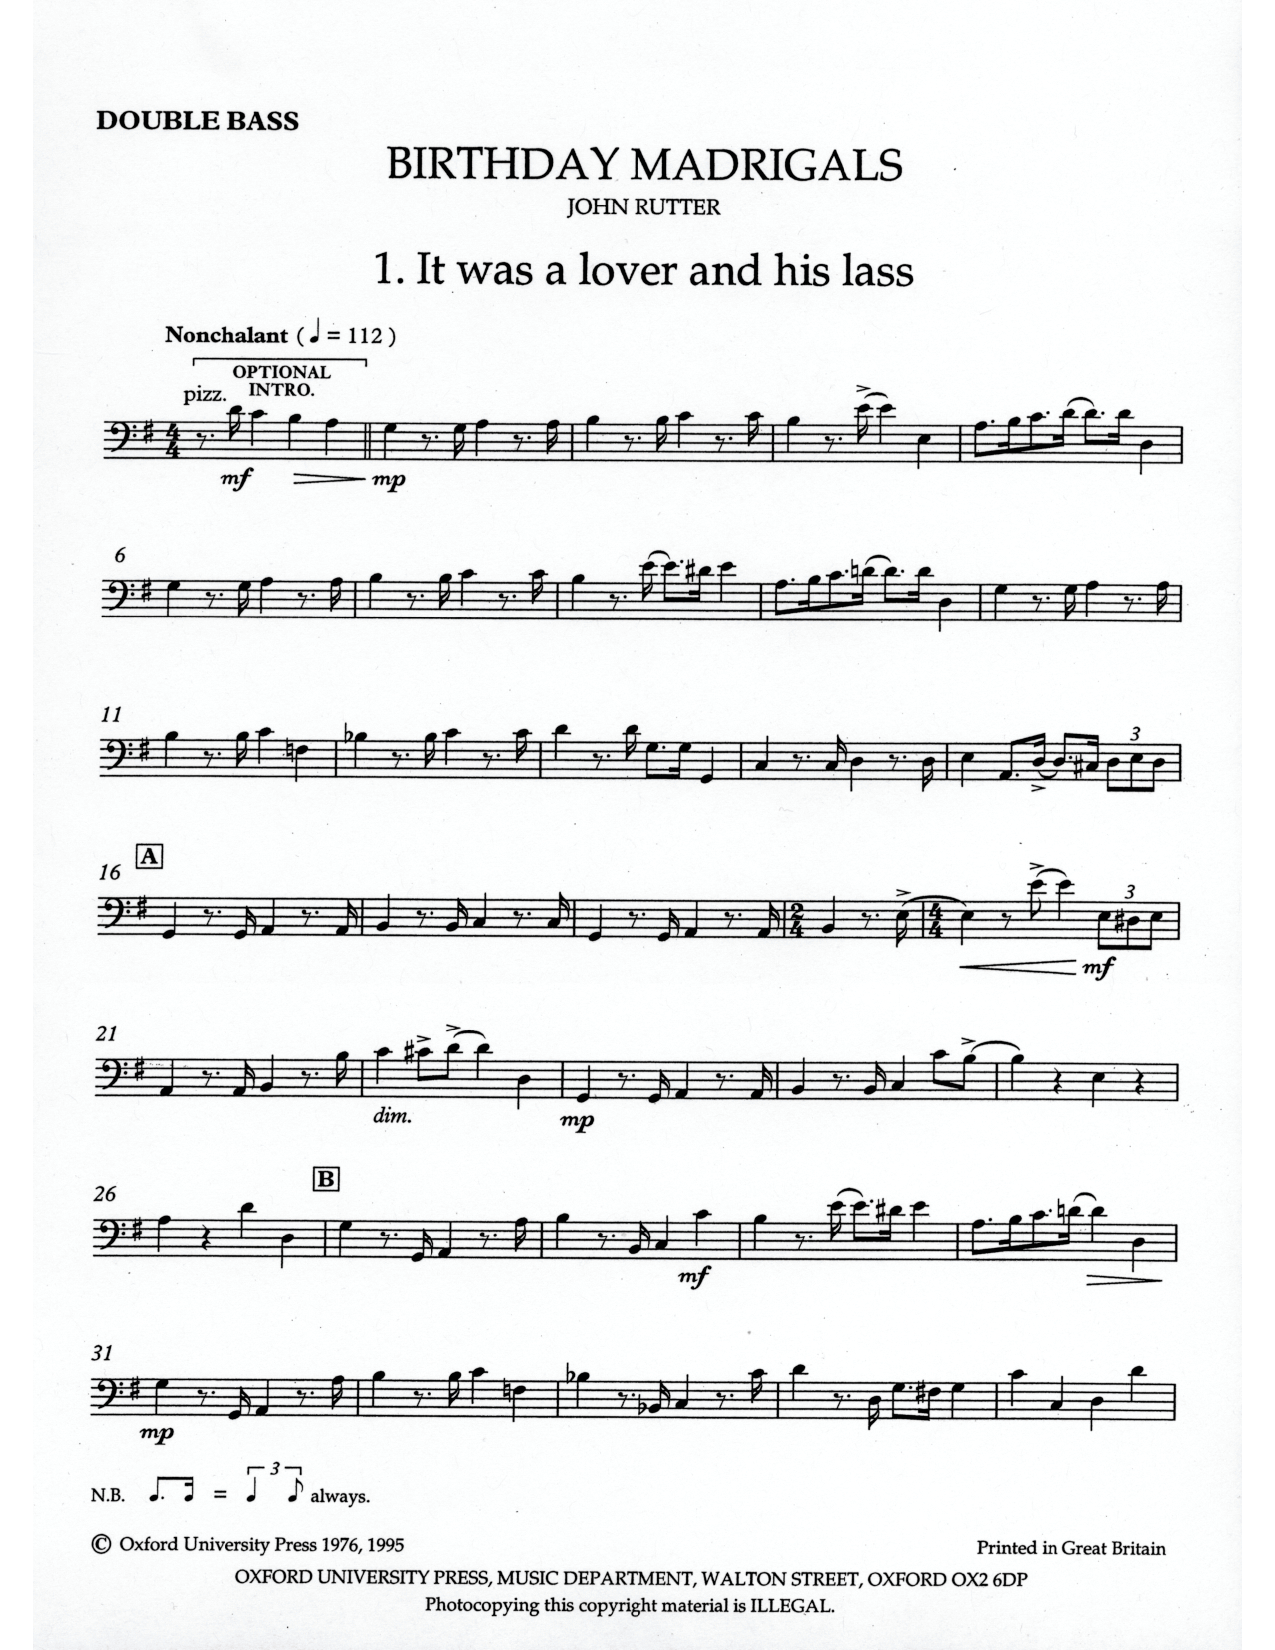 Birthday Madrigals Double Bass Part